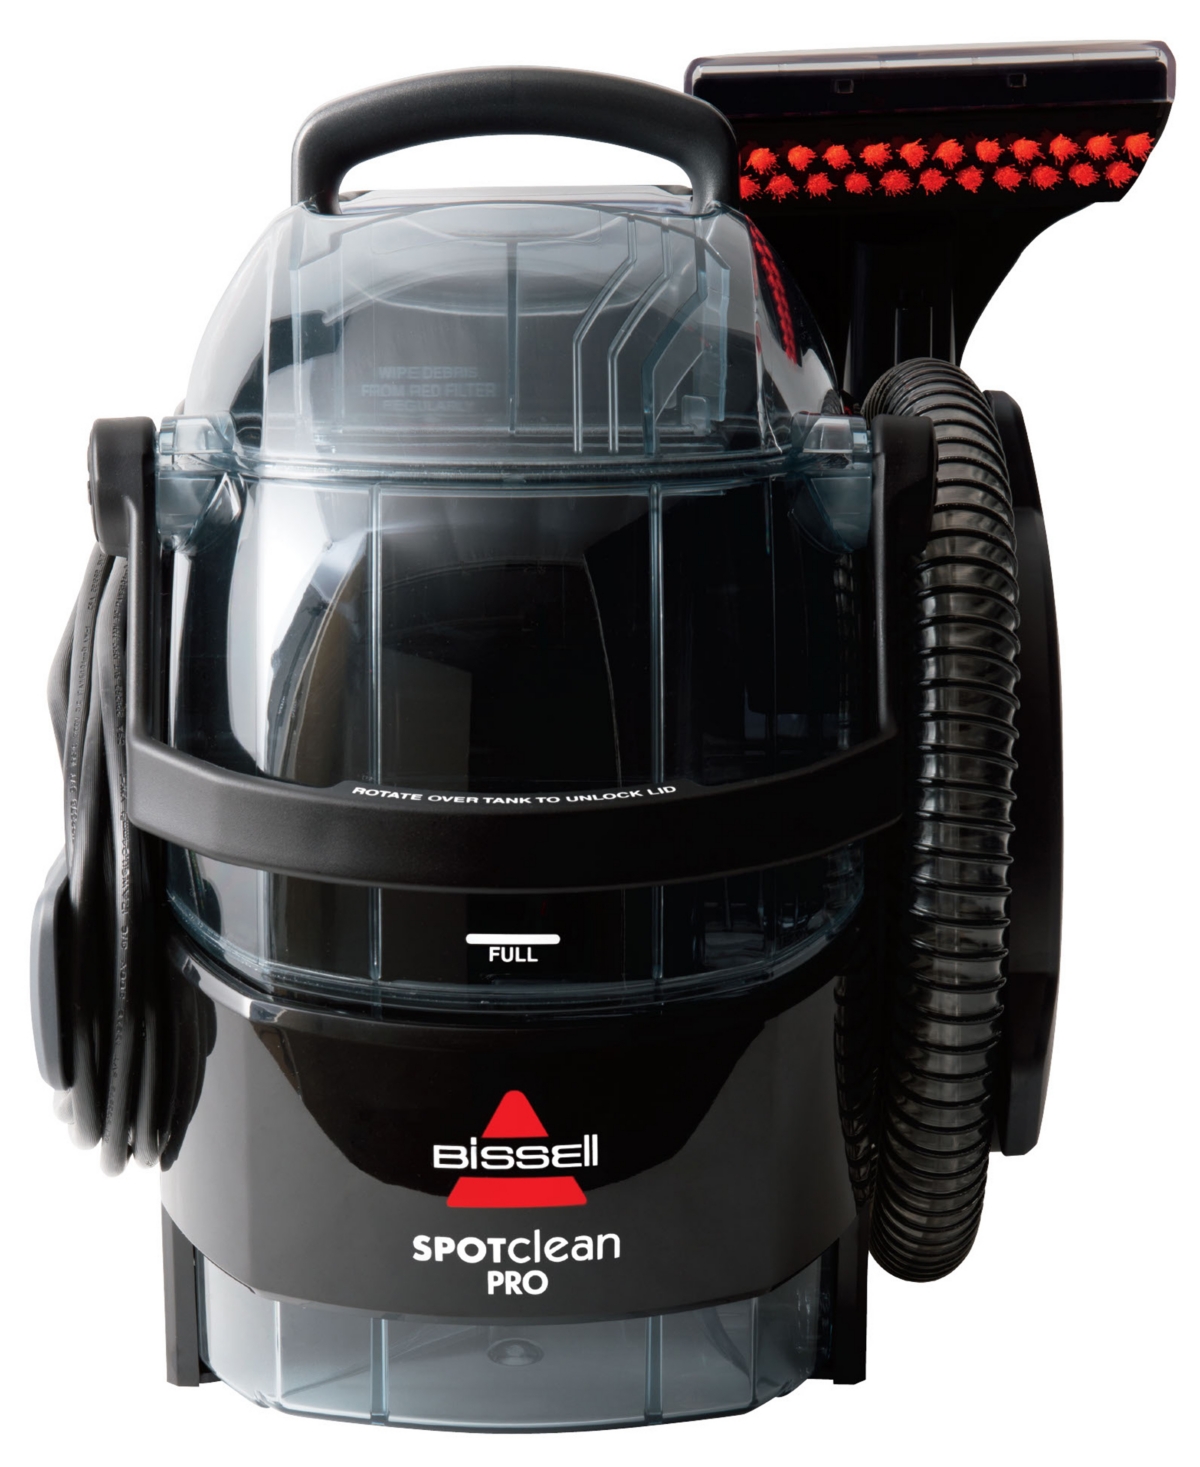 Bissell Spotclean Pro Portable Carpet Cleaner In Black